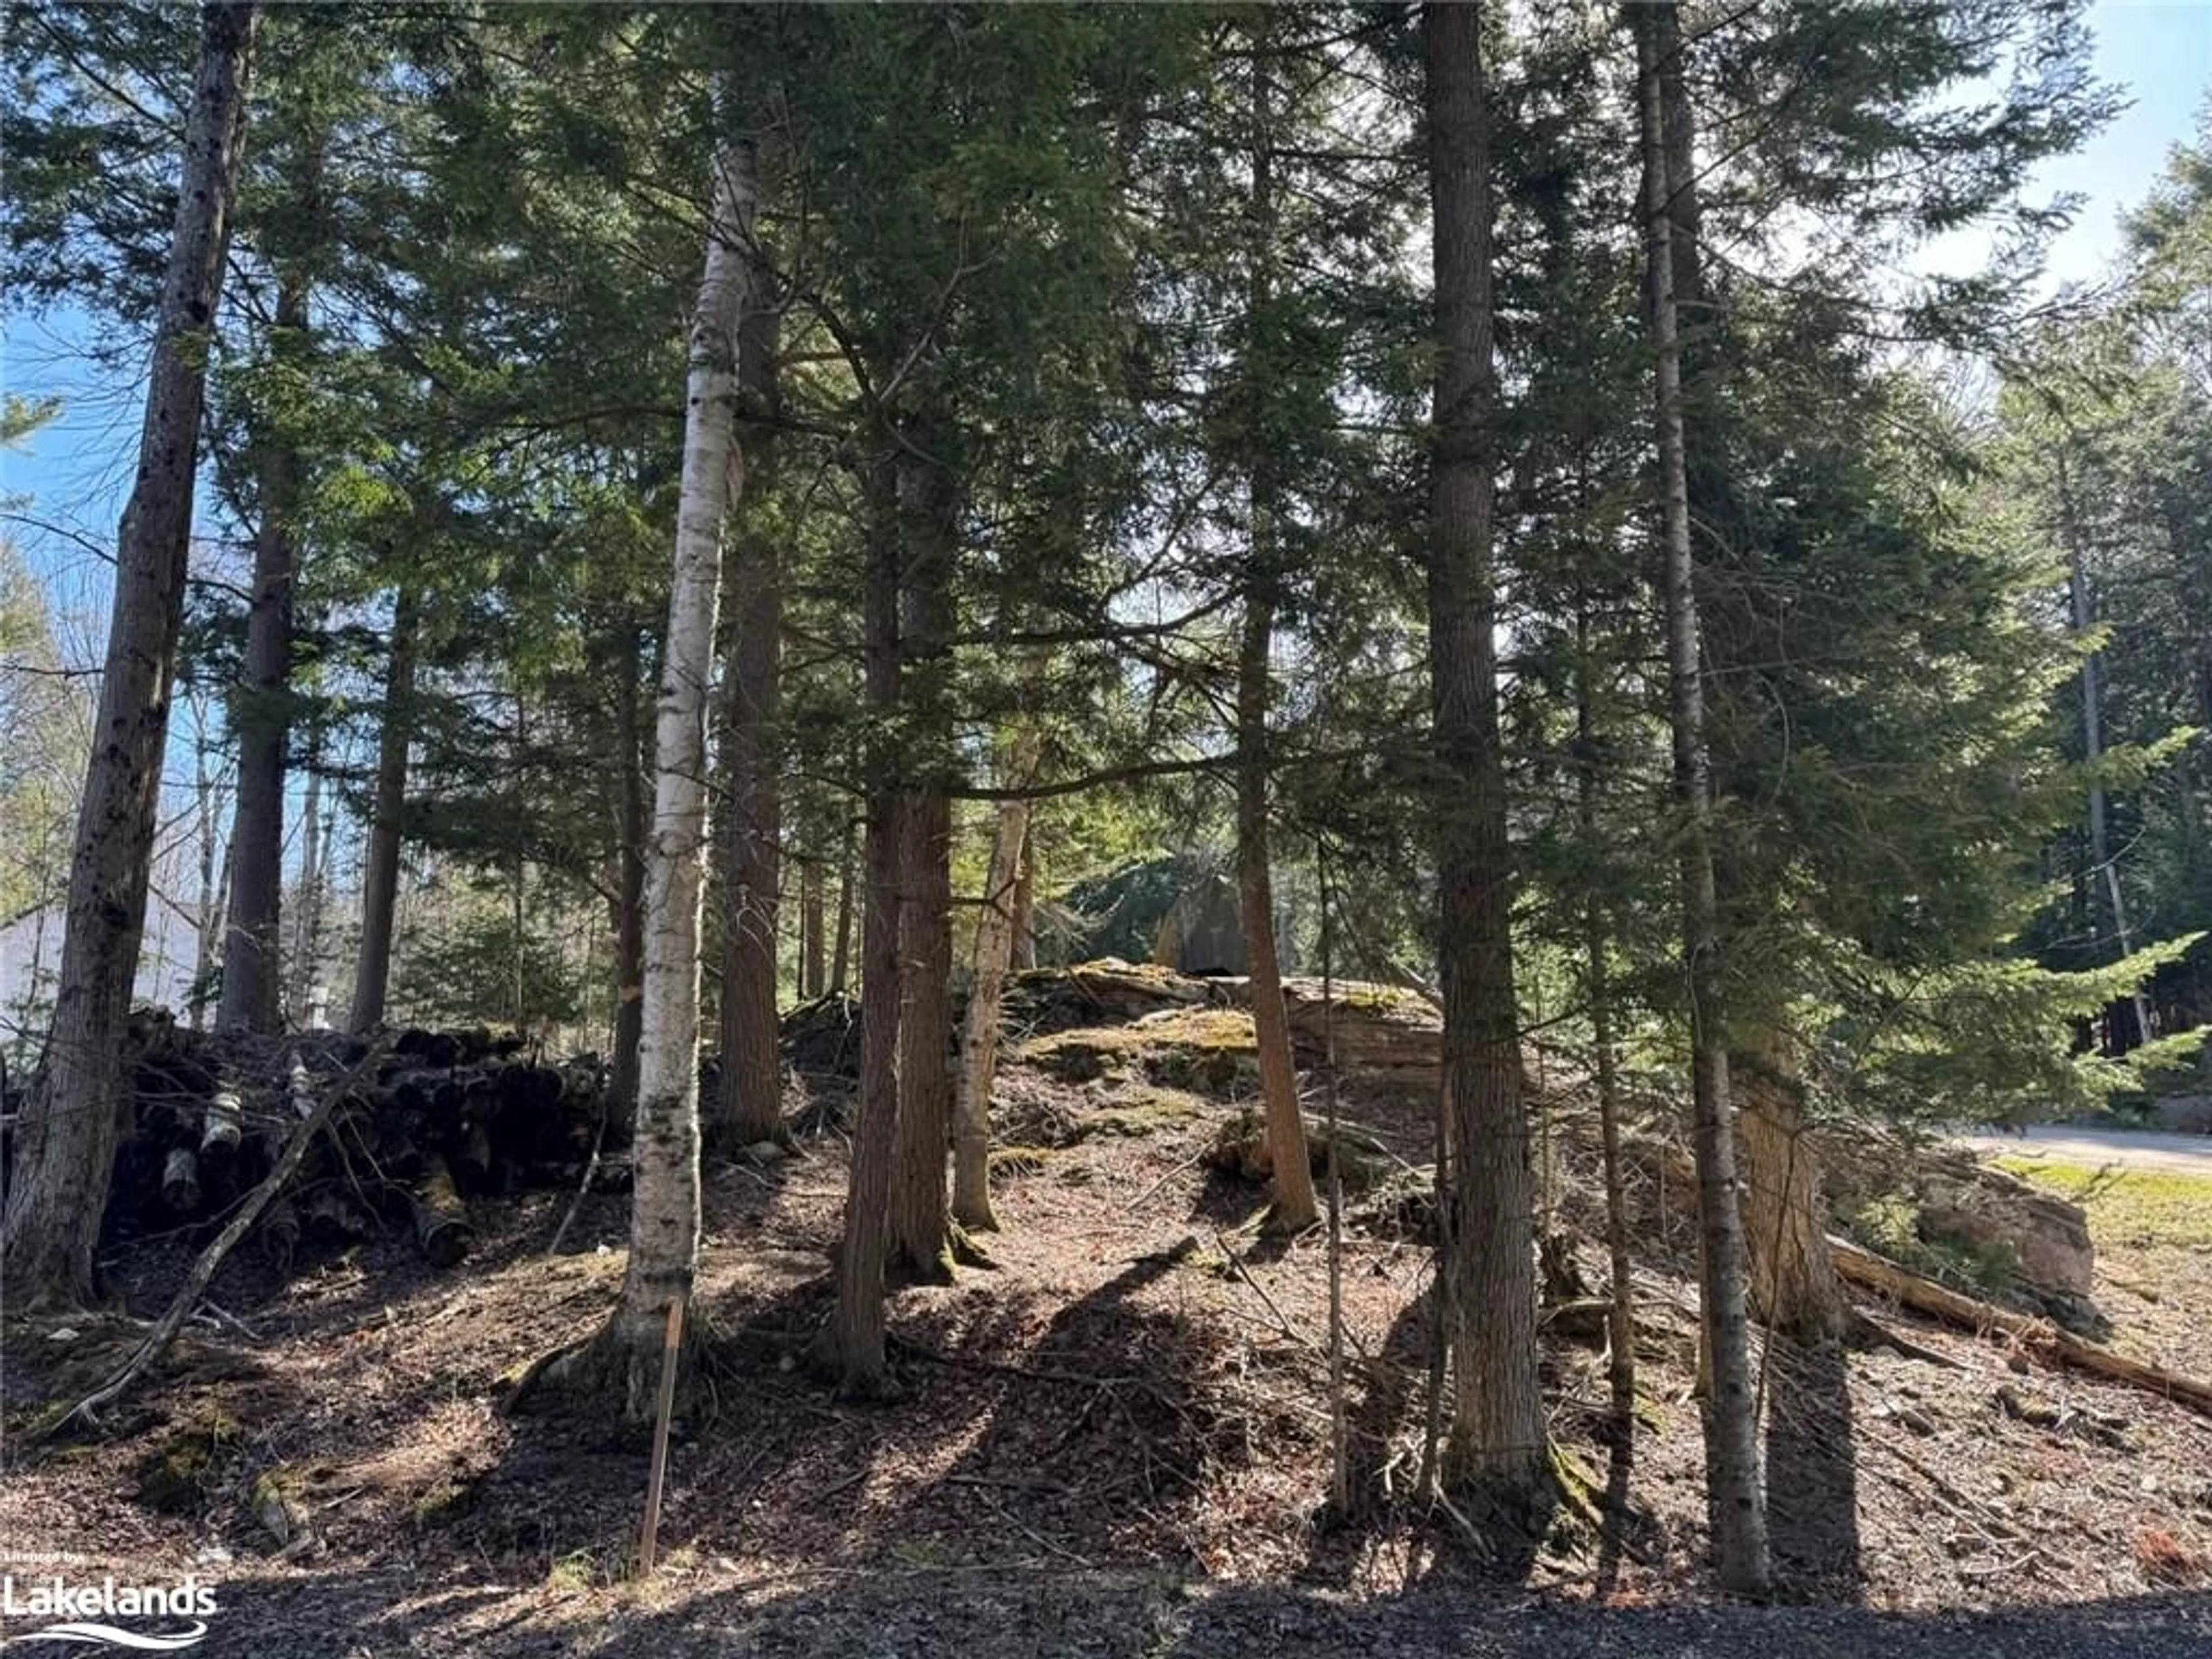 Forest view for 0 Lakeview St, Haliburton Ontario K0M 1S0